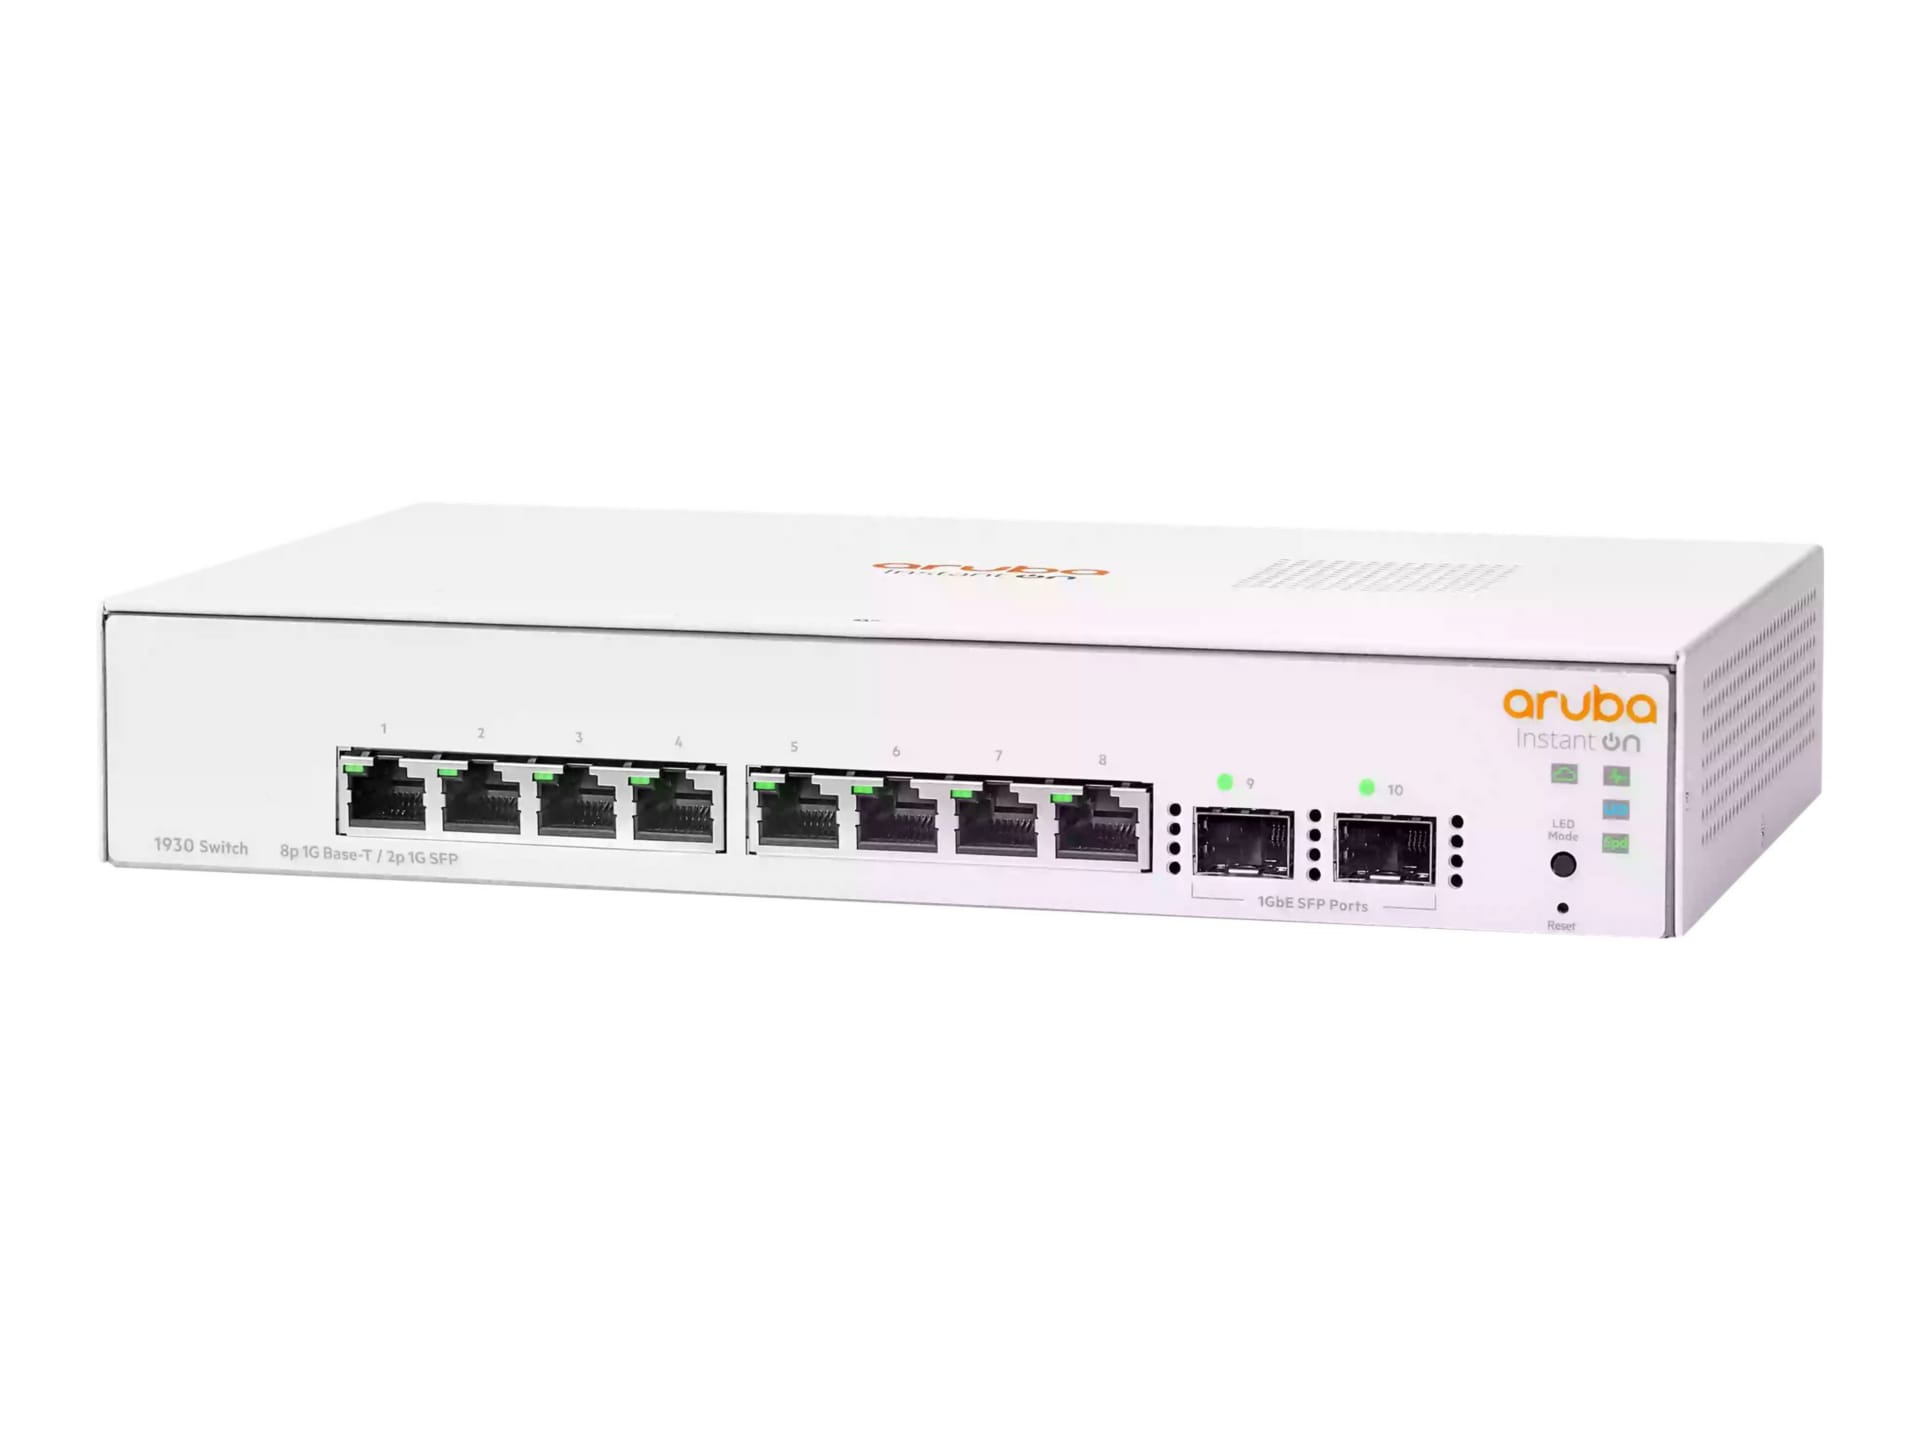 HPE HPE Networking Instant On 1930 8G 2SFP Switch - switch - 10 ports - man